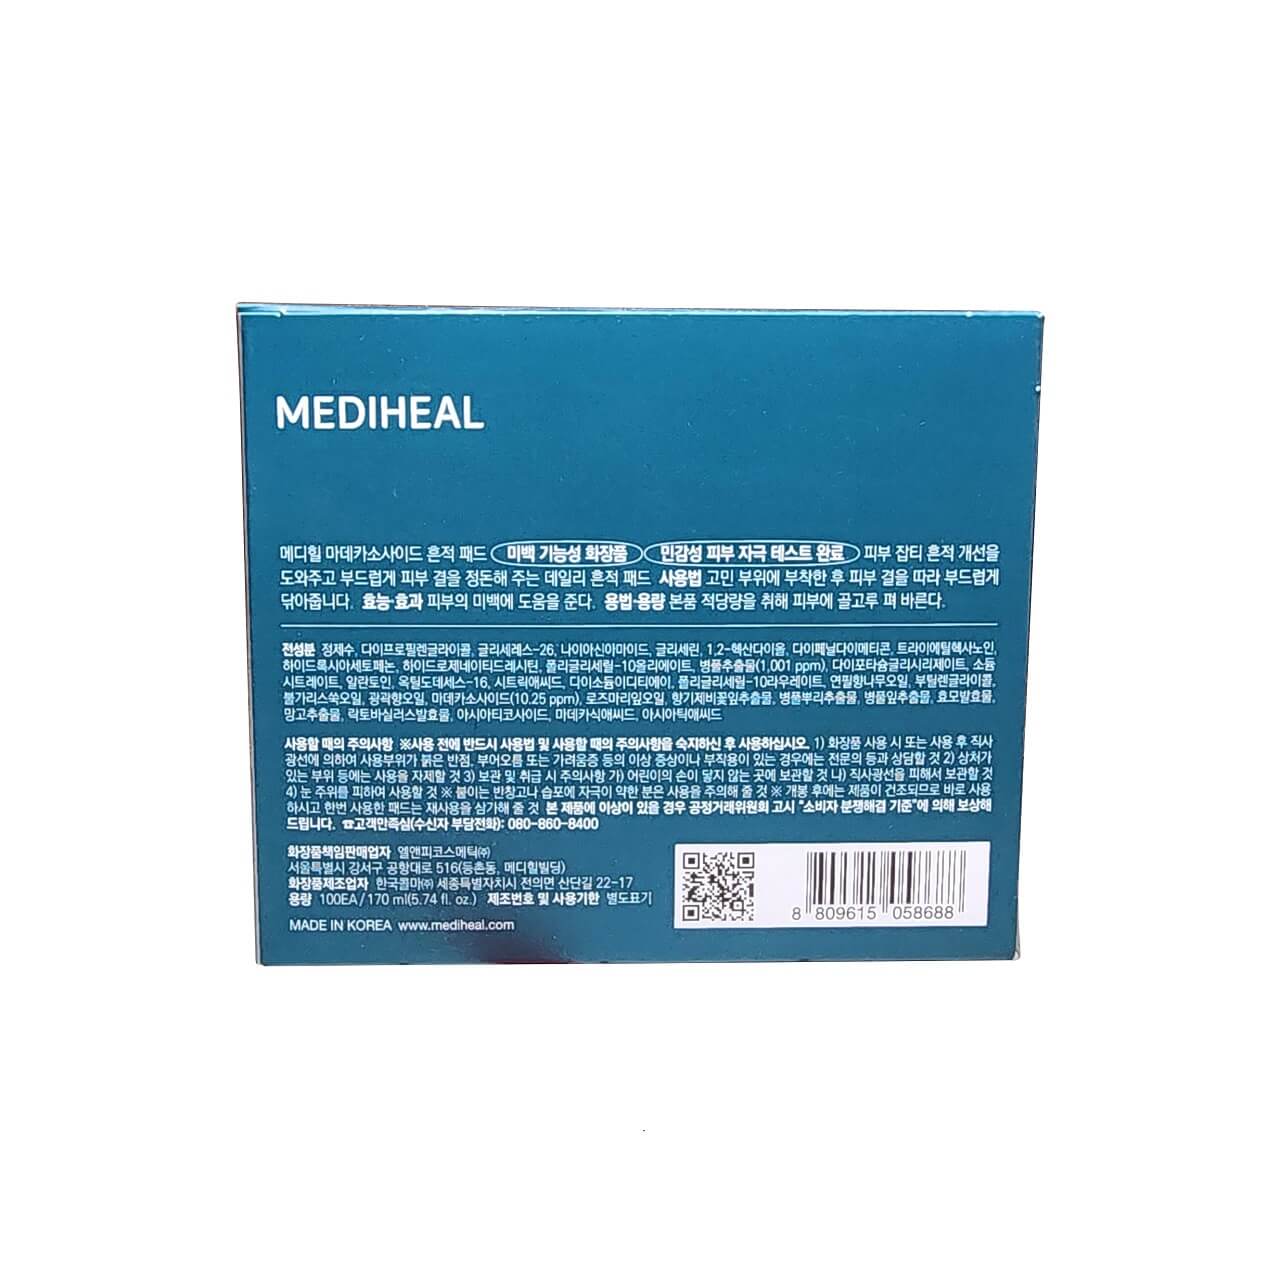 Description, ingredients, cautions for Mediheal Madecassoside Blemish Pad (100 count) in Korean